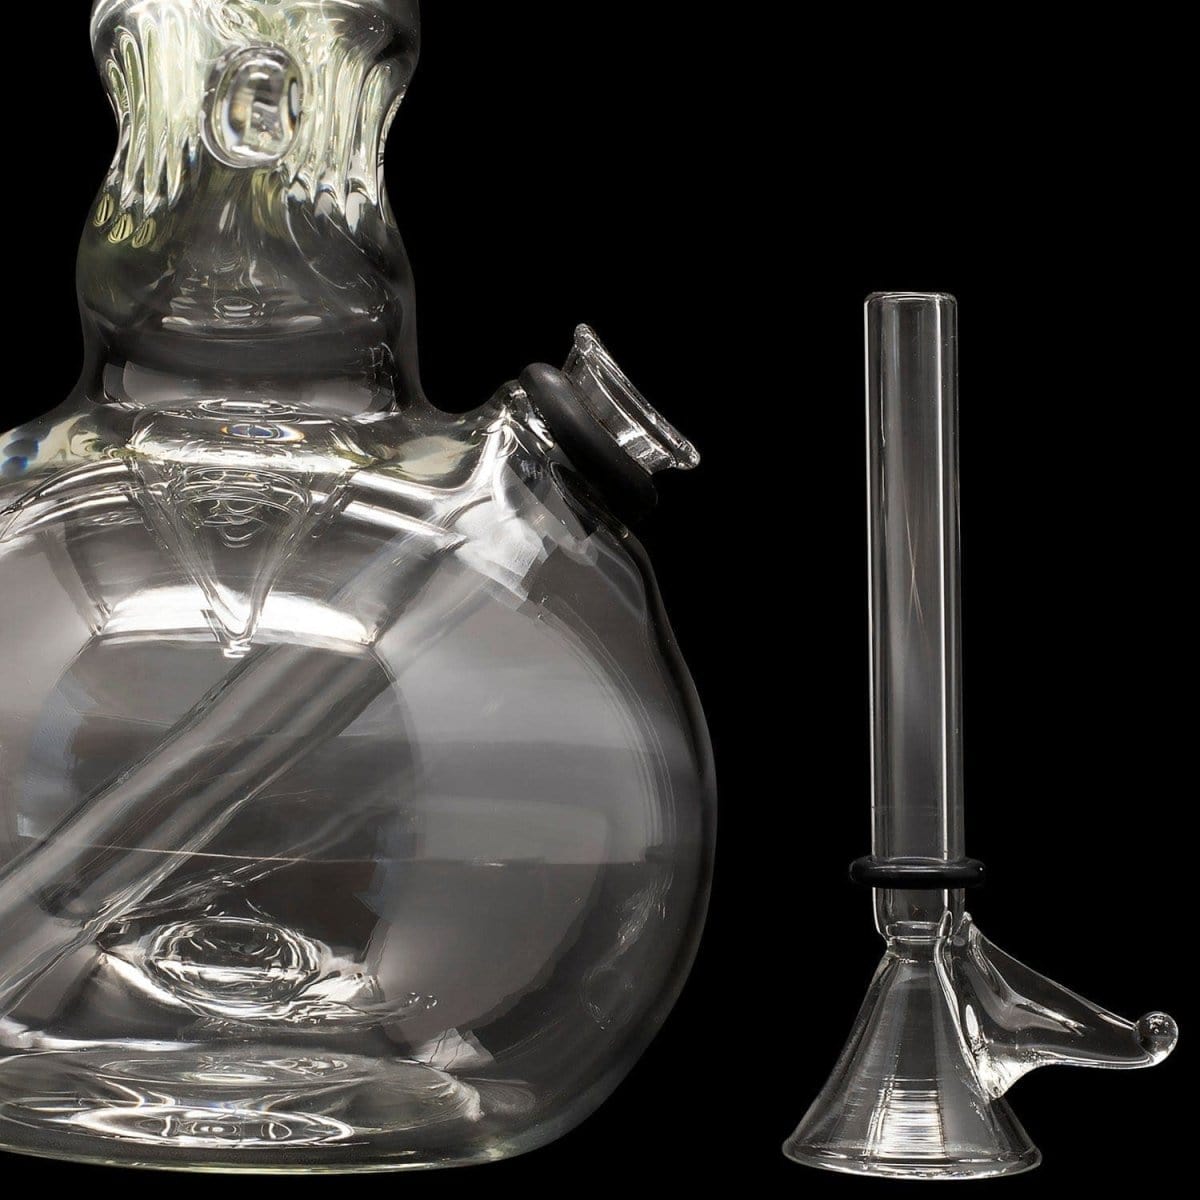 LA Pipes Bong "Jacobs Ladder" Clear Zong Bong